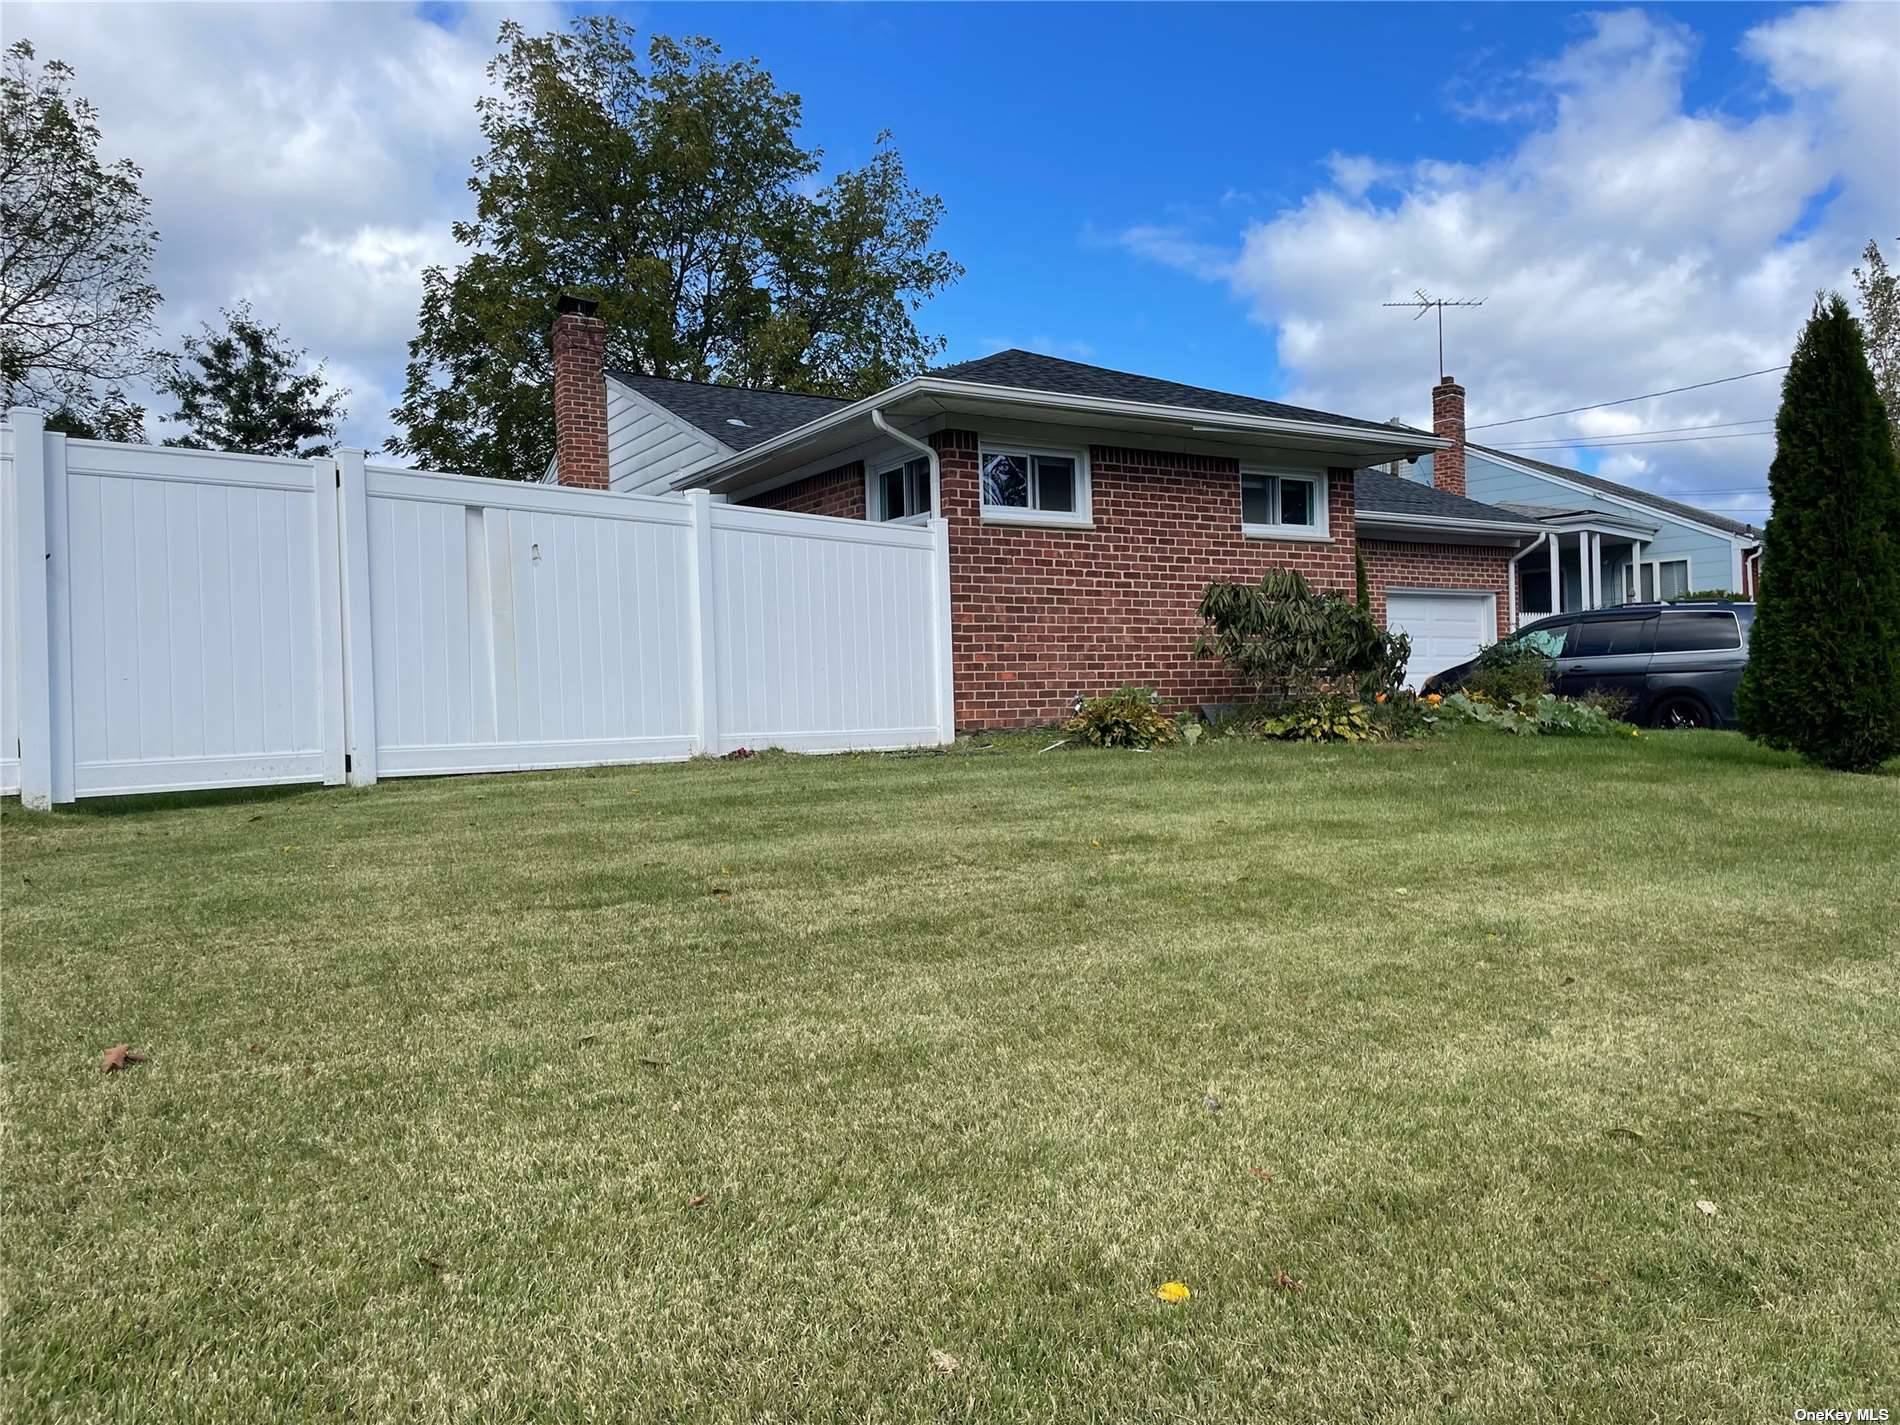 Renovated 3 Bedroom Brick Ranch on a Wonderful Residential Block.